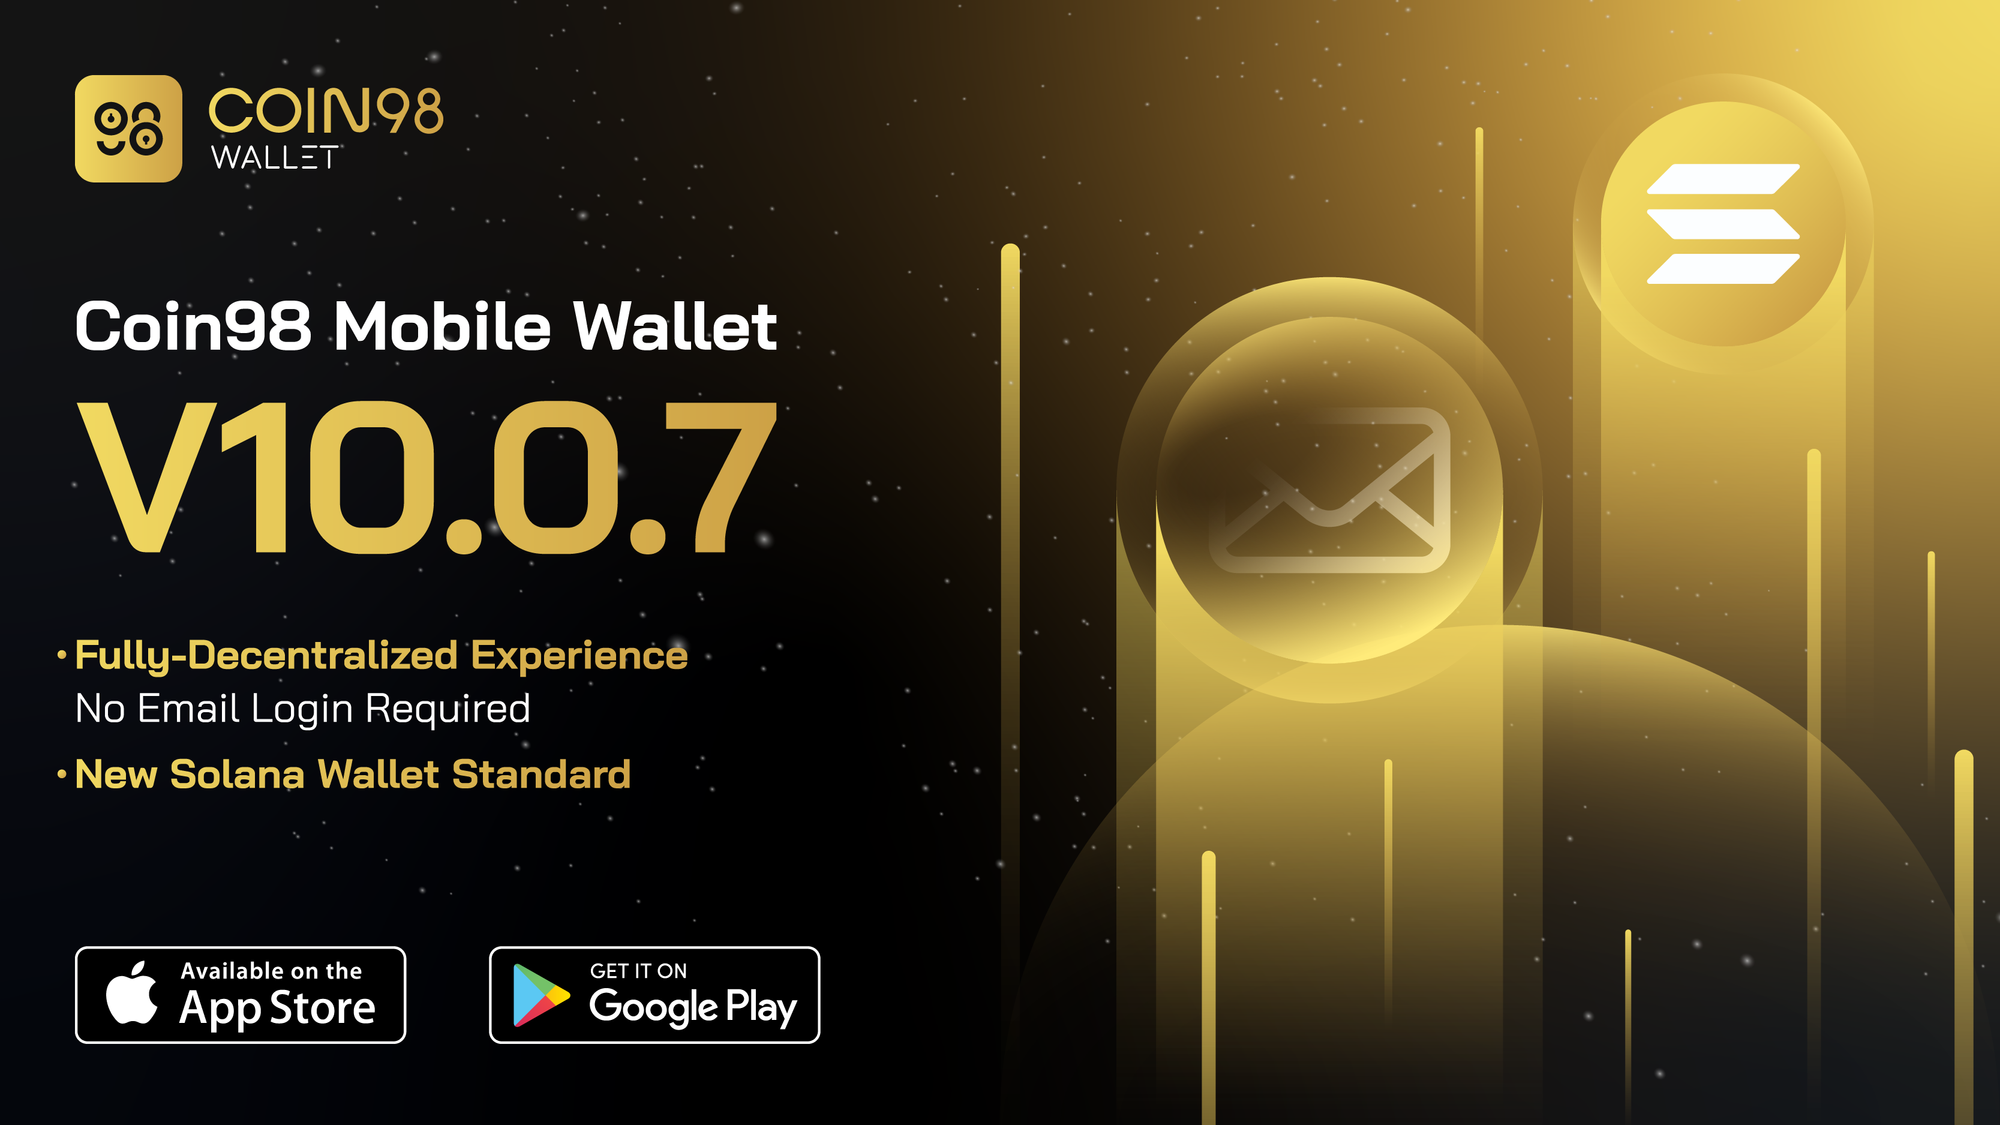 Coin98 Mobile Wallet releases the latest update (V10.0.7) to enhance a fully decentralized experience for users